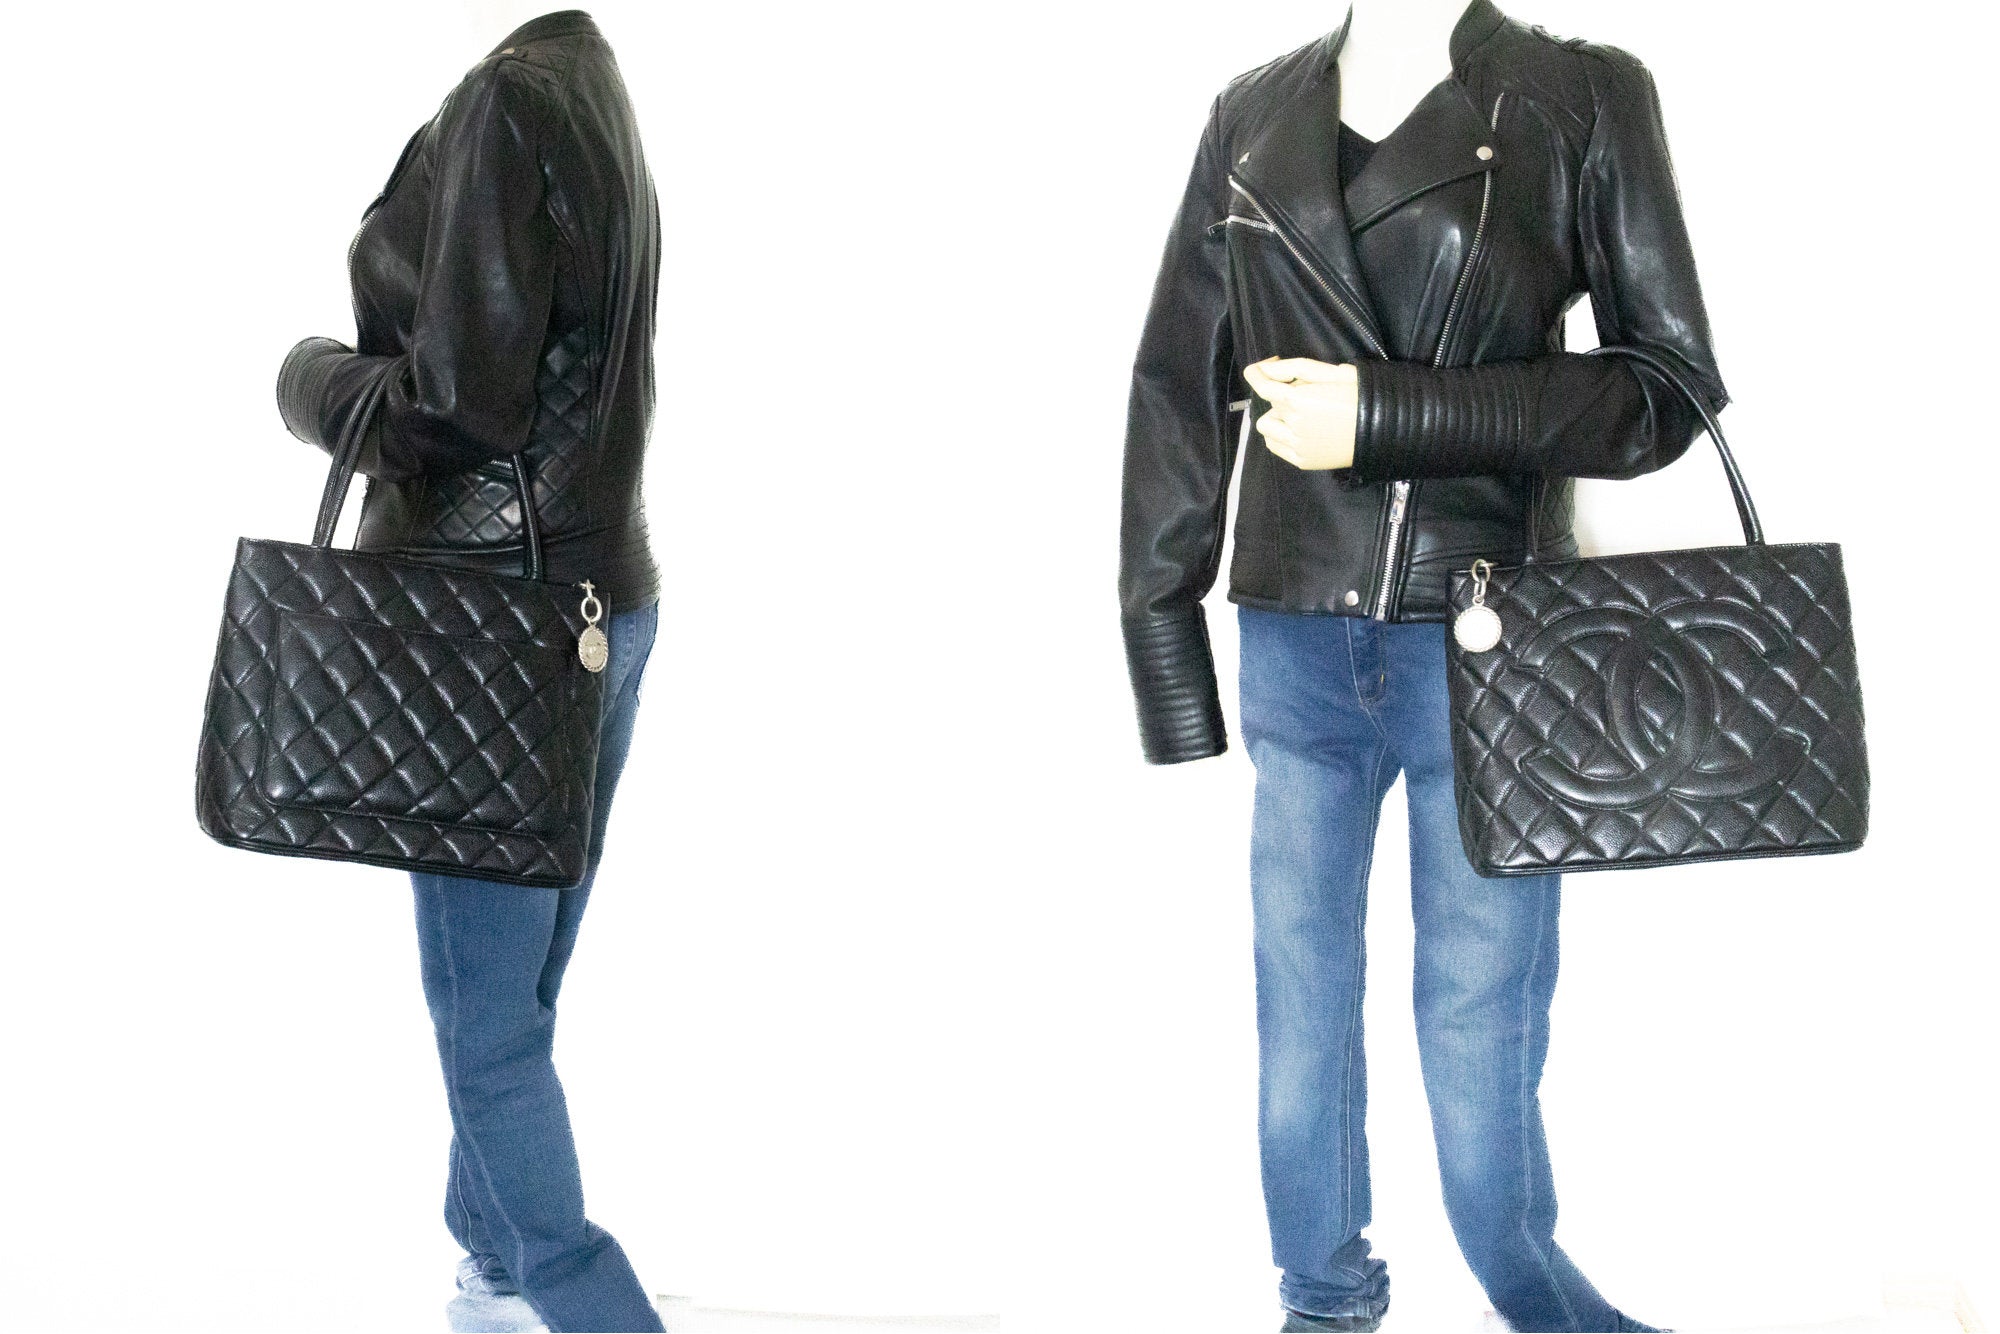 CHANEL Caviar Quilted Timeless Soft Shopper Bag Black